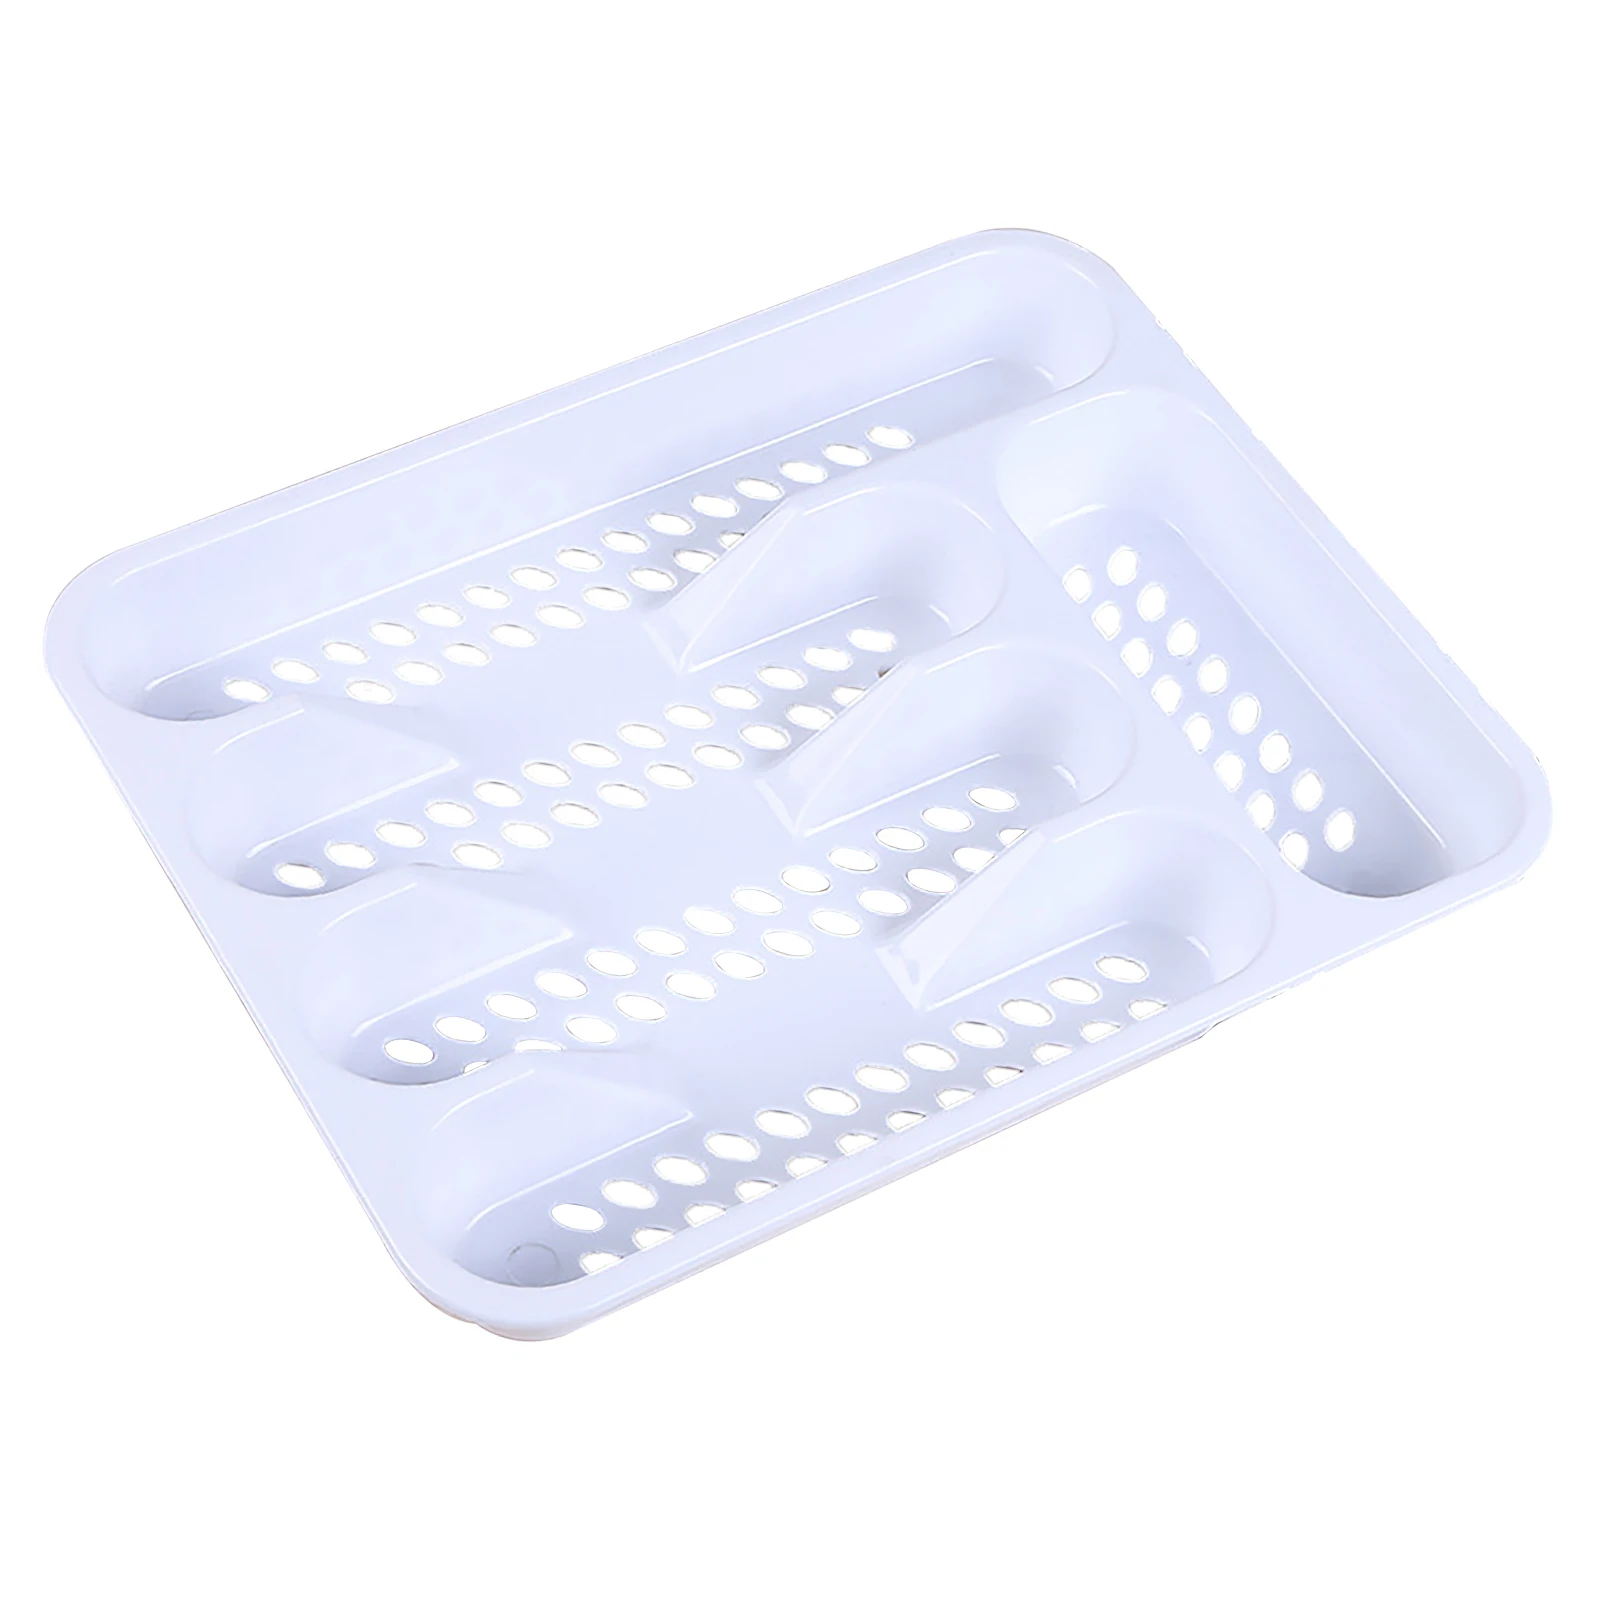 Large Capacity Rectangle Cutlery Organizer 5 Compartments Drawer Divider Home Office Storage Box Plastic Tray For Kitchen Daily